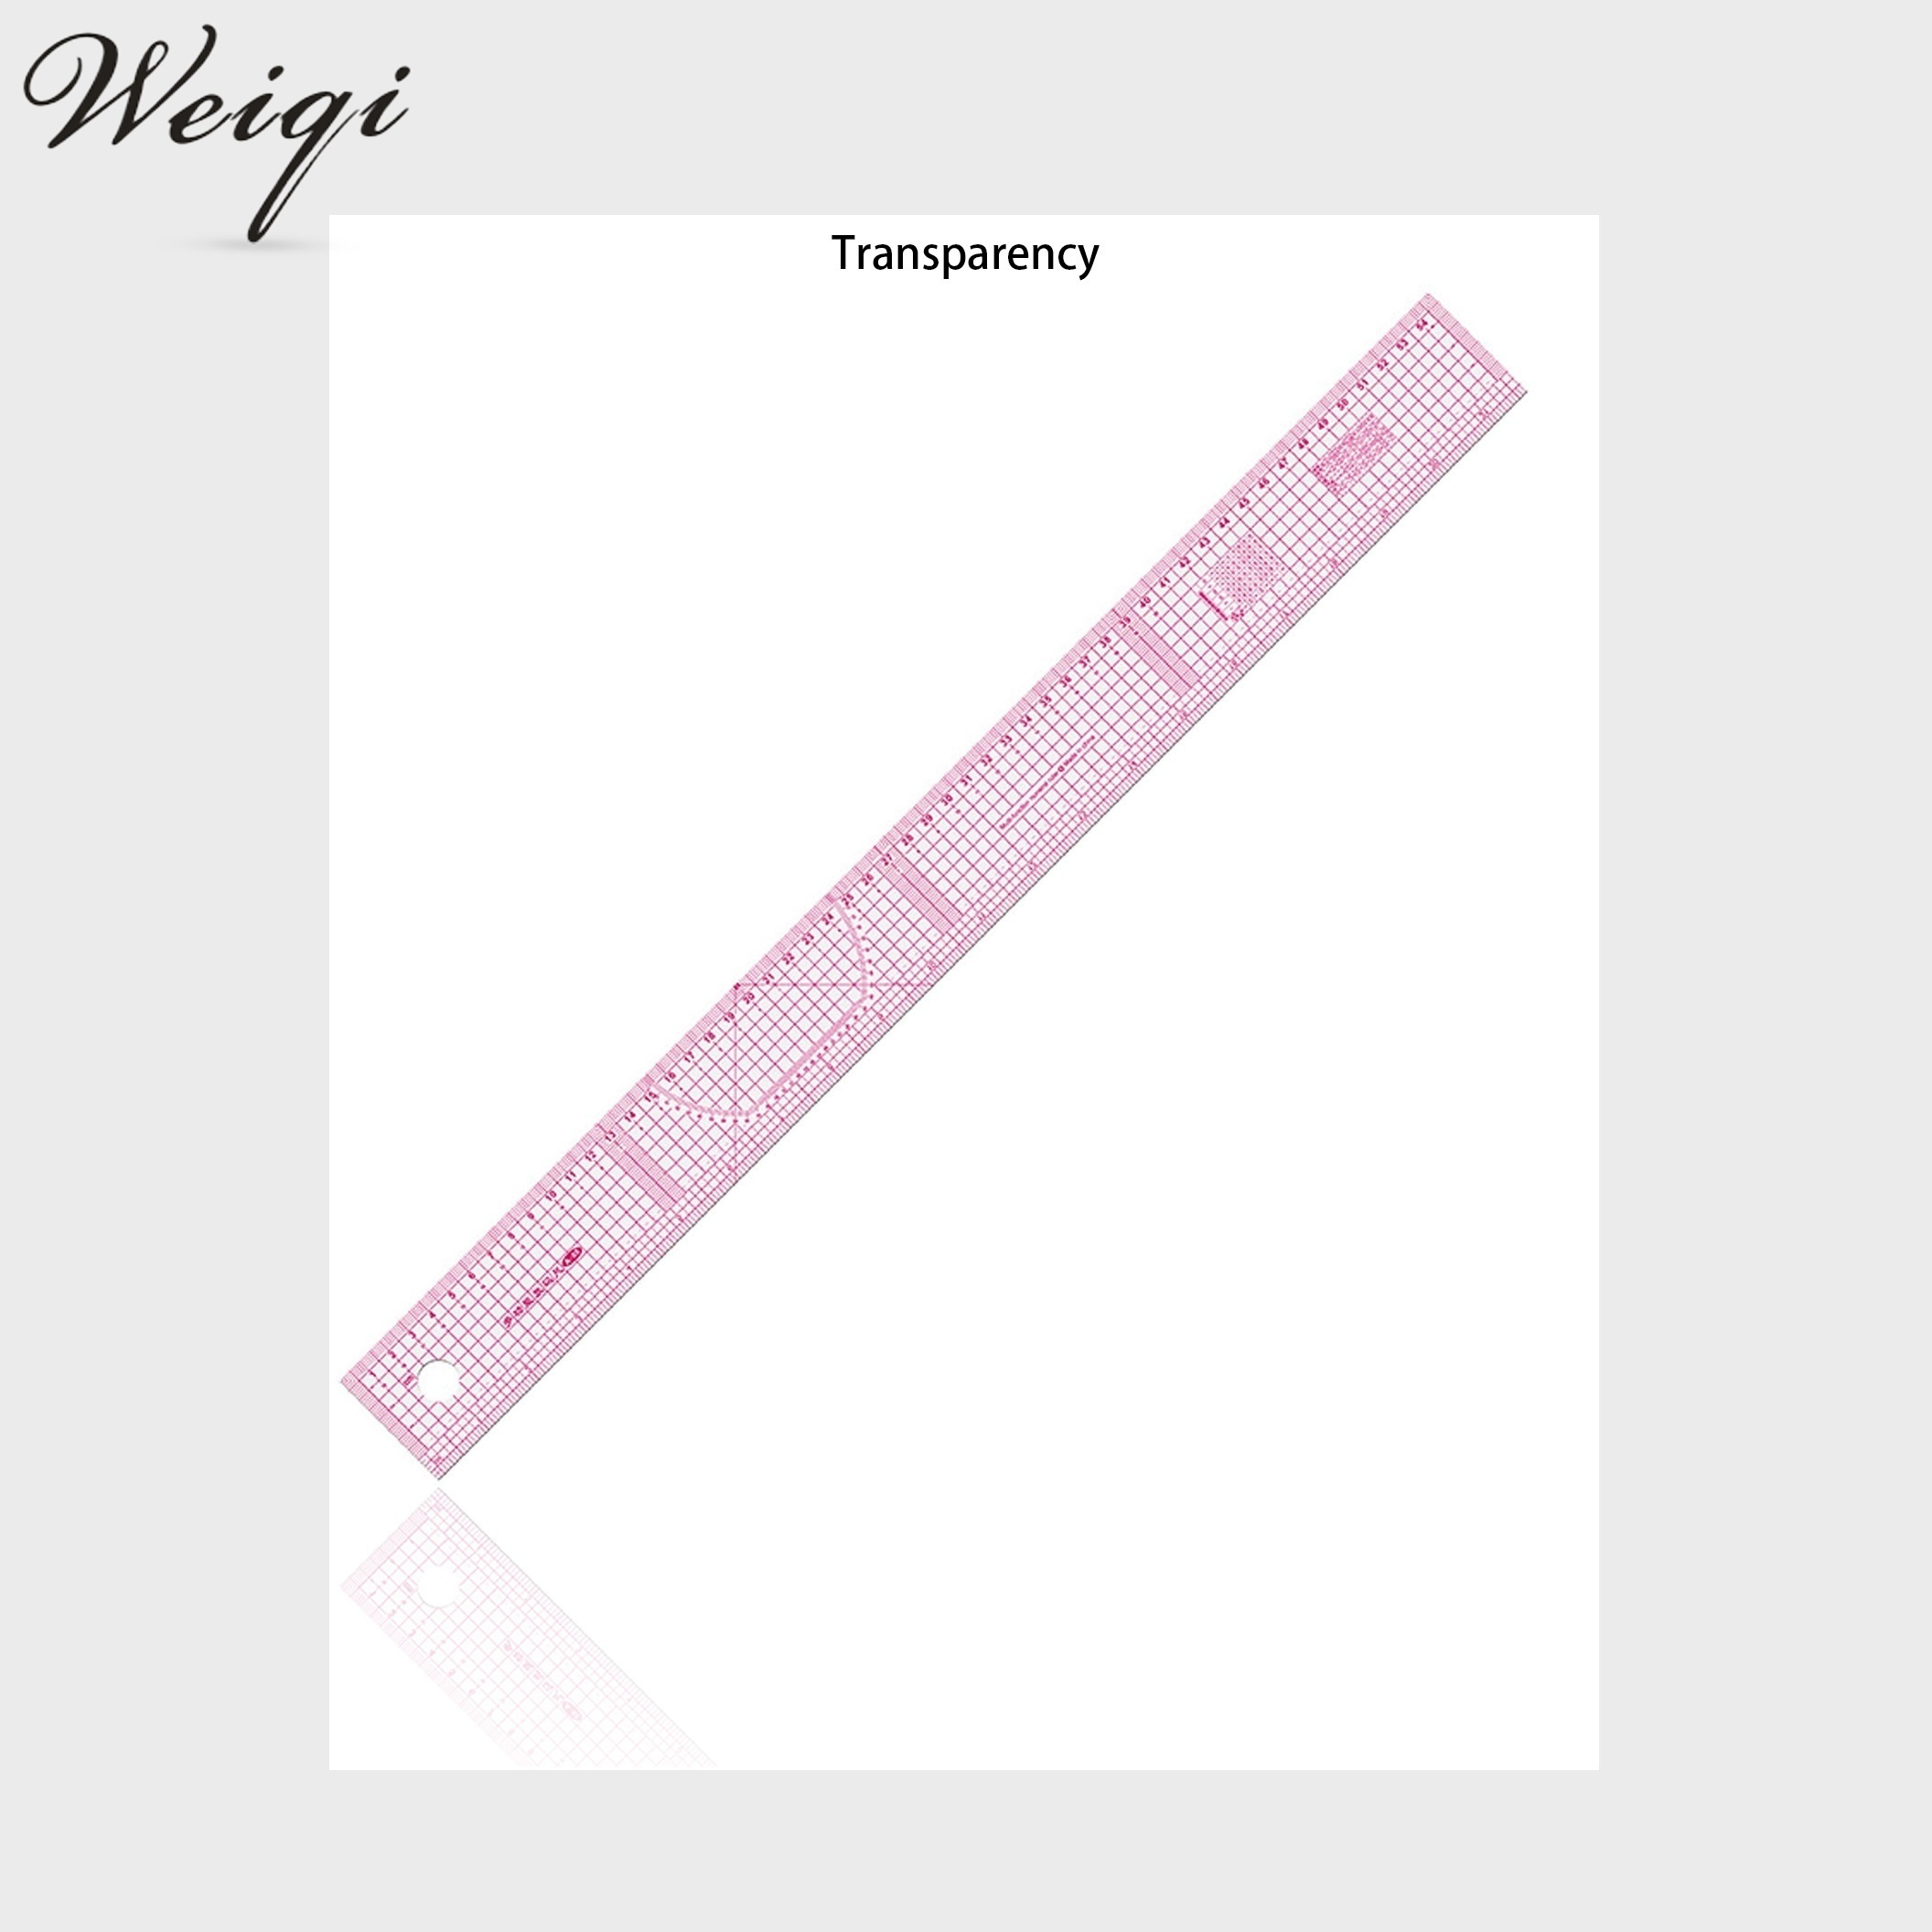 Circle Magic Quilting Ruler Tape - Multifunctional Quilt Ruler Patchwork Cutters Acrylic Craft Ruler - Cutting Ruler Fabric Ruler Measuring Tape Cutt